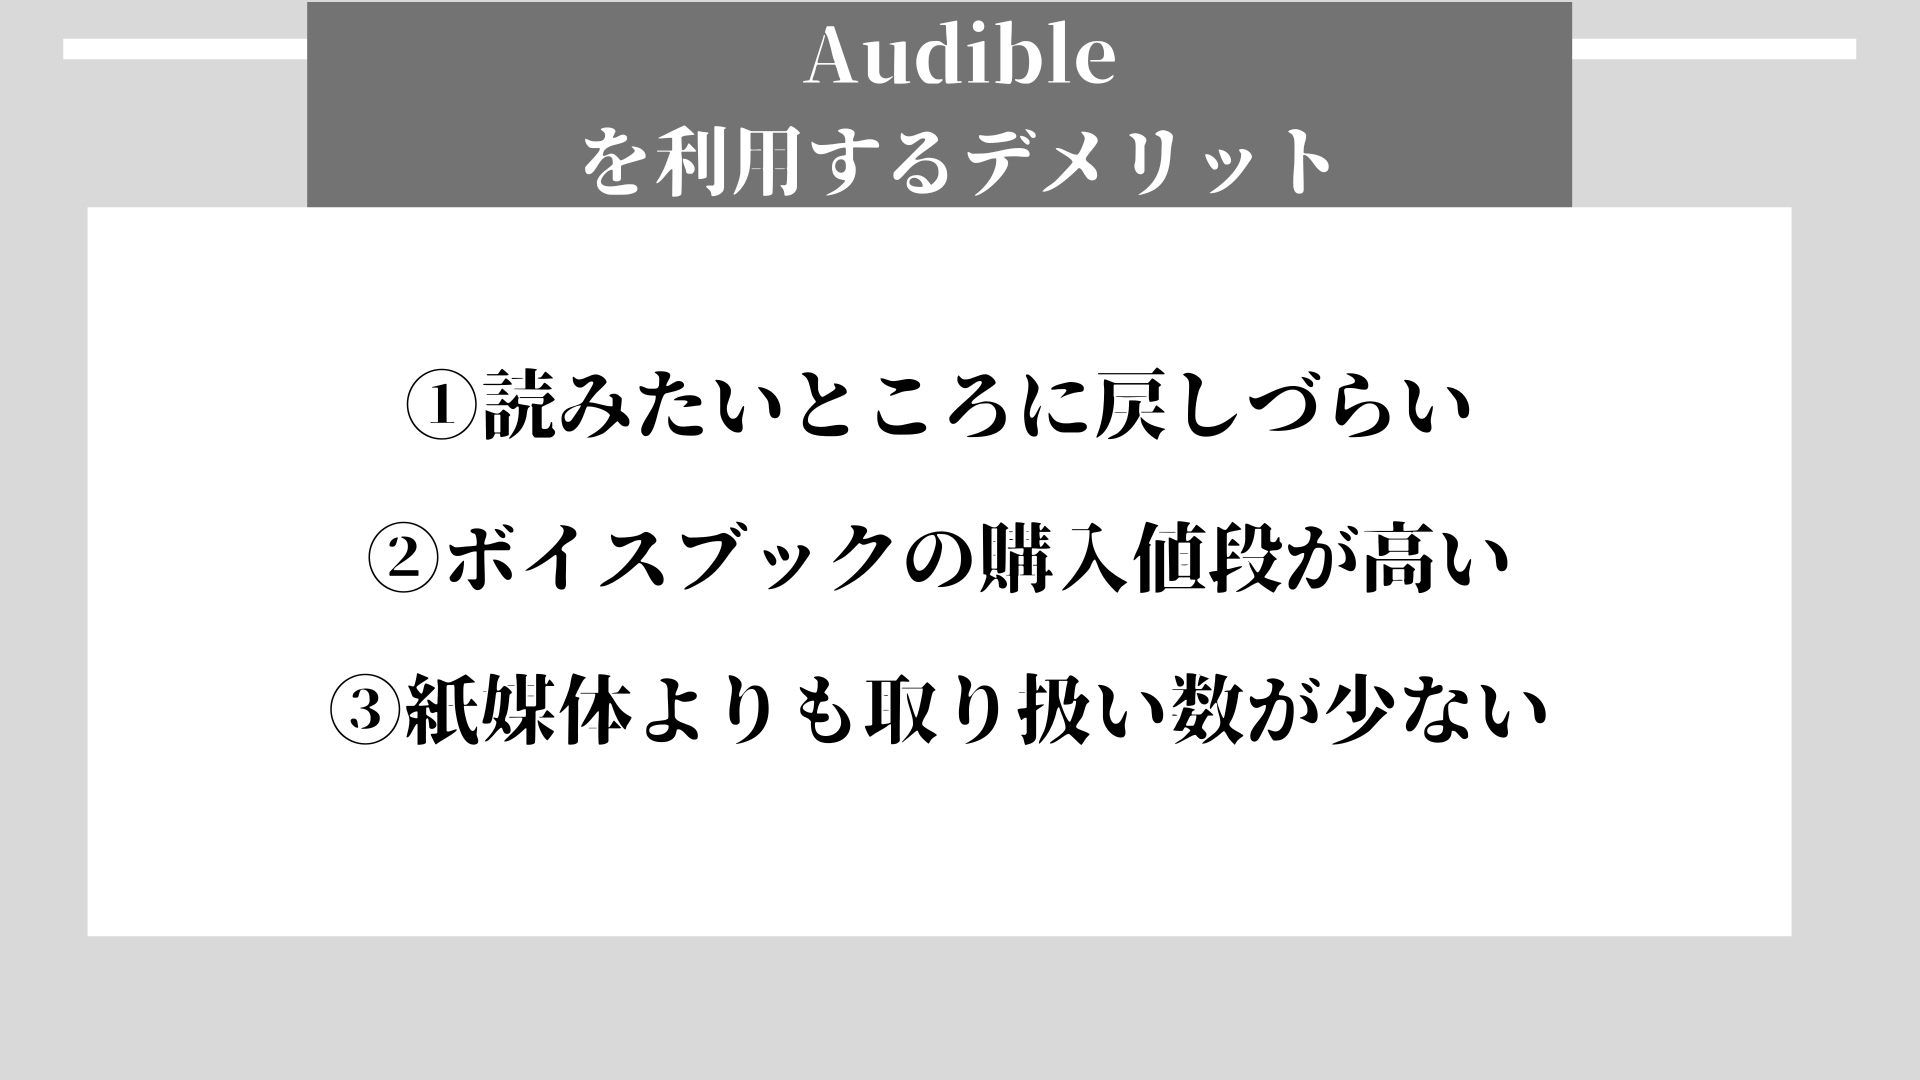 Audible　デメリット